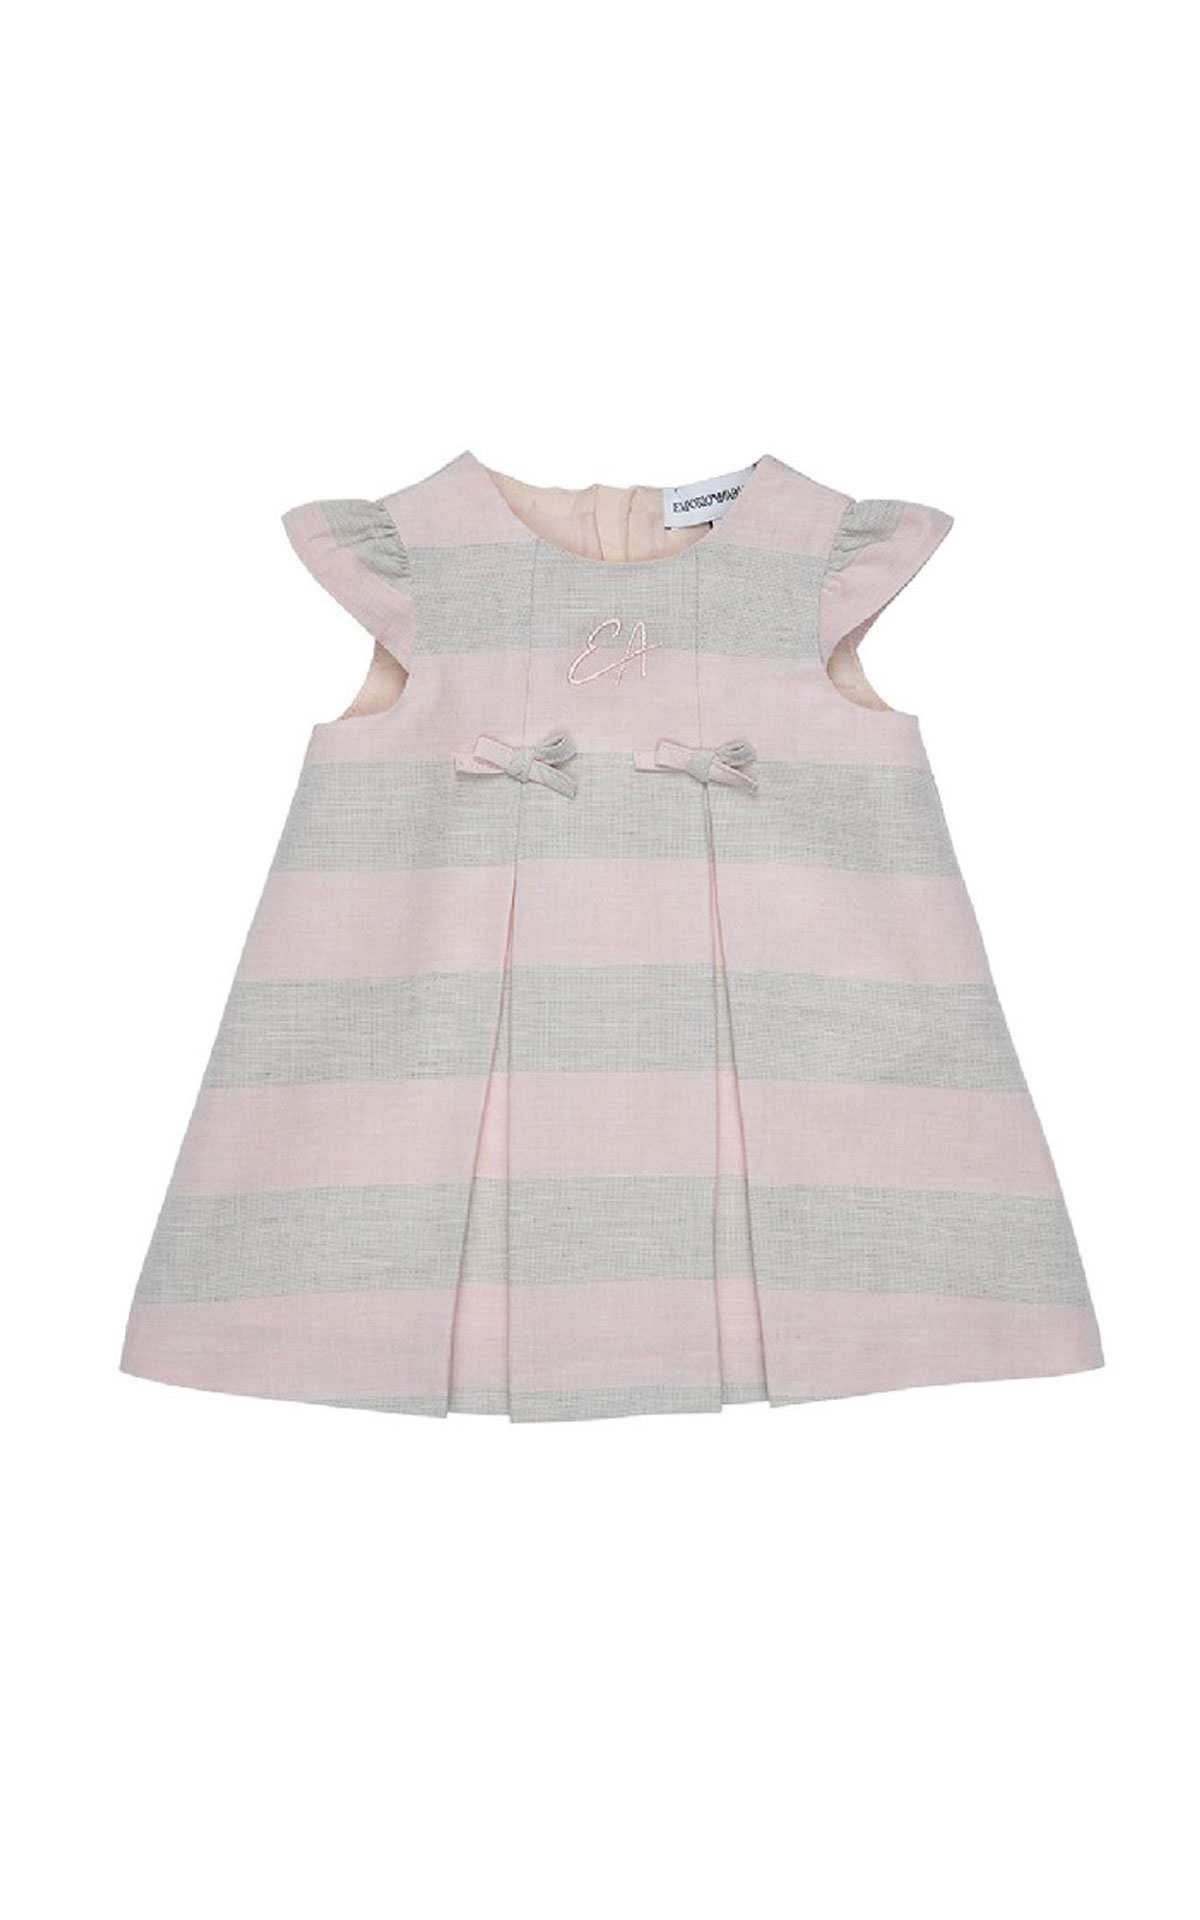 Armani Baby girl dress from Bicester Village